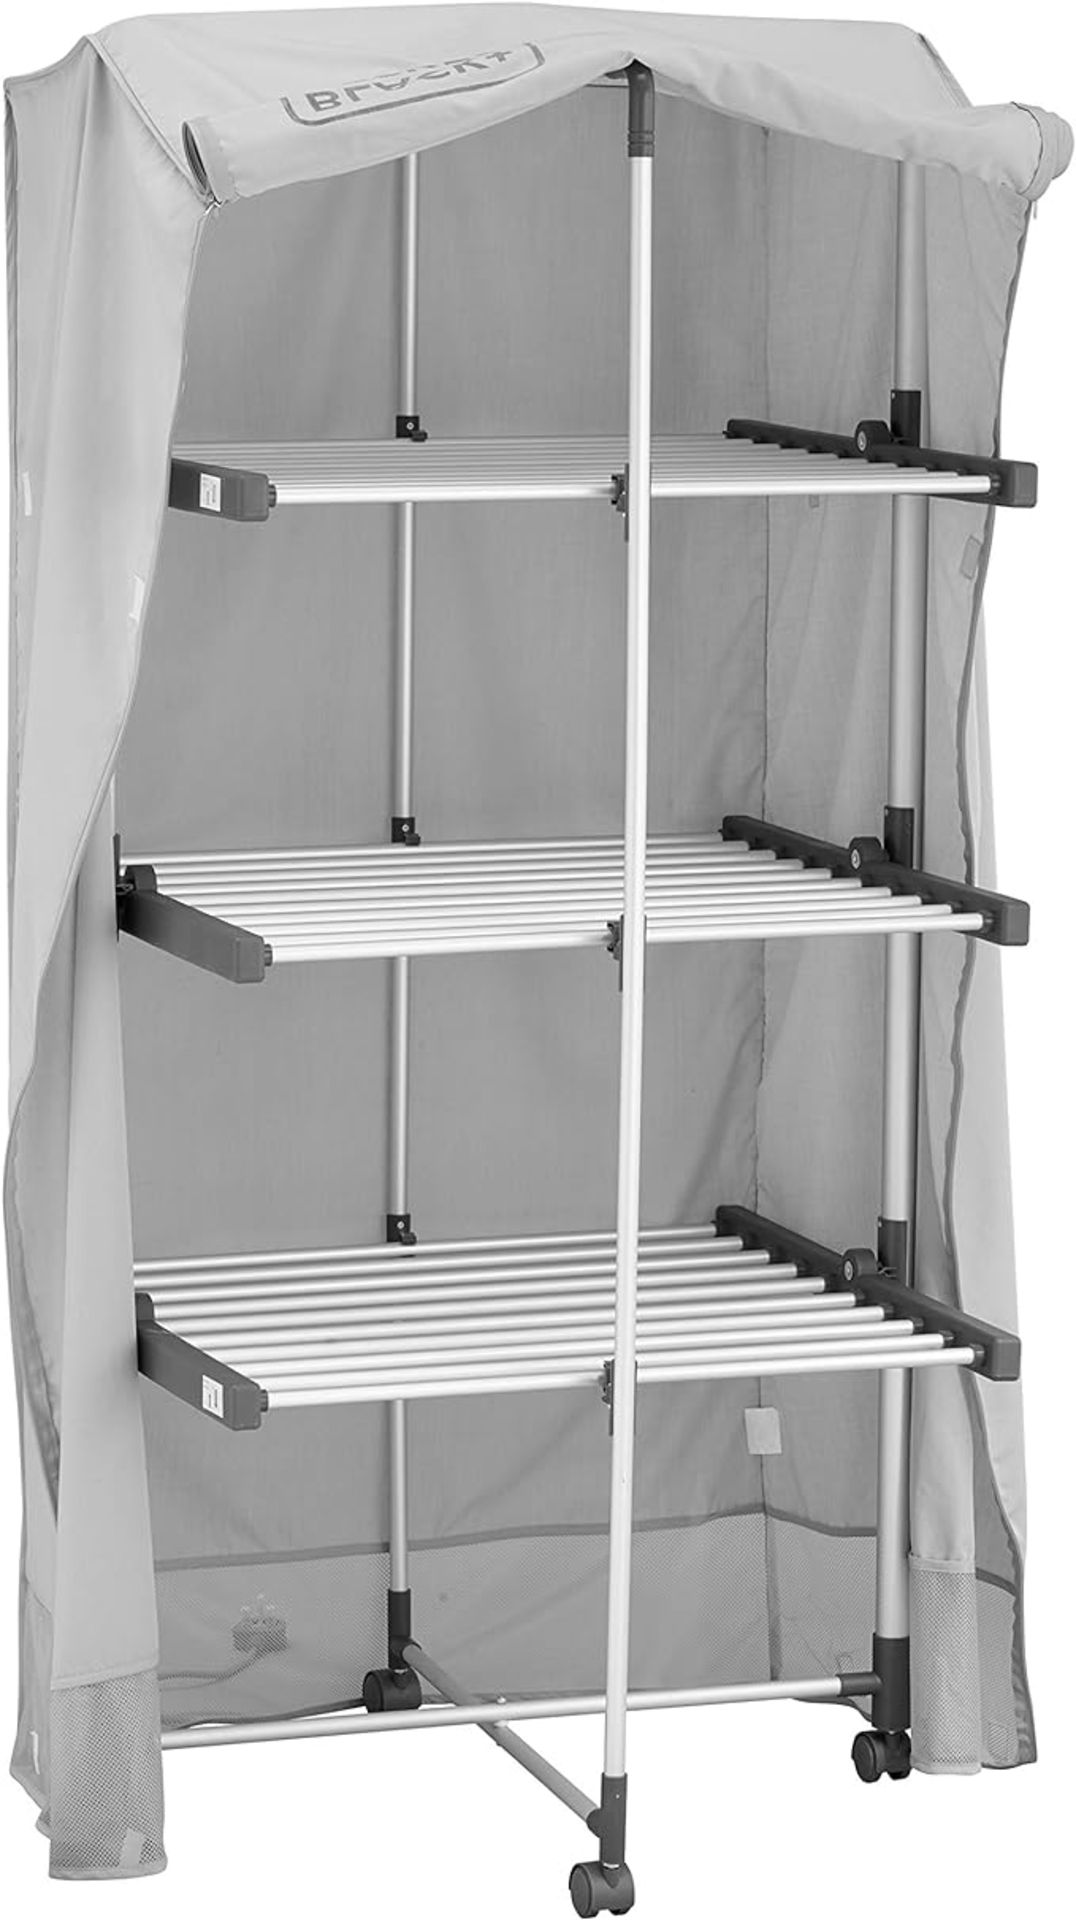 BLACK+DECKER 63091 3-Tier Heated Clothes Airer with Cover & Wheels Aluminium, Cool Grey, 140cm x